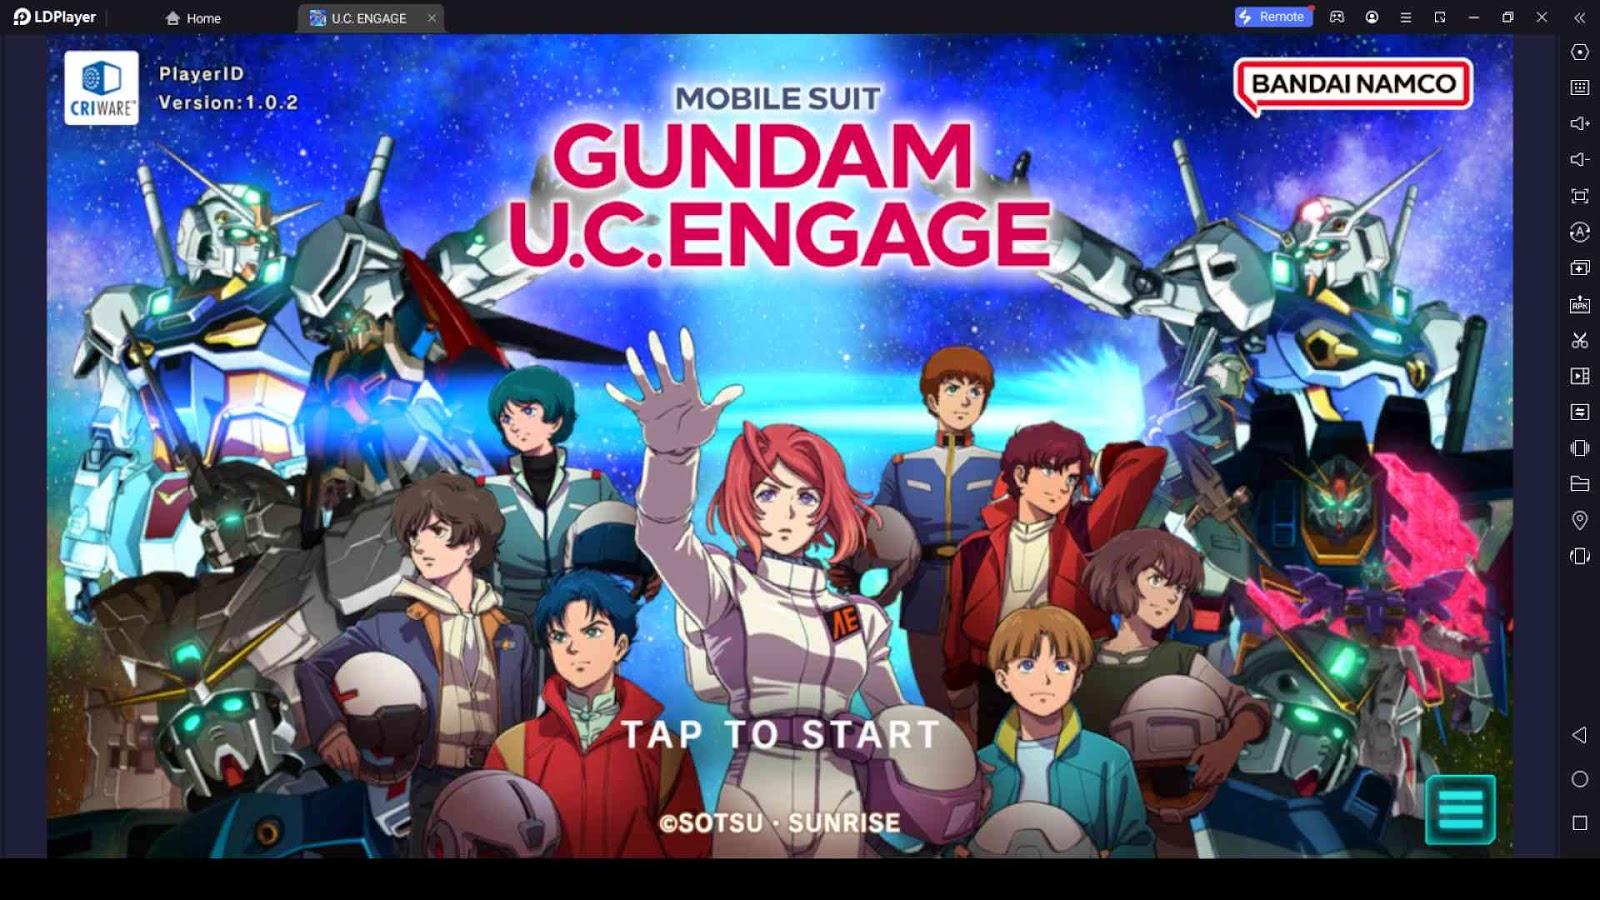 MOBILE SUIT GUNDAM U.C. ENGAGE Tier List and Reroll Guide